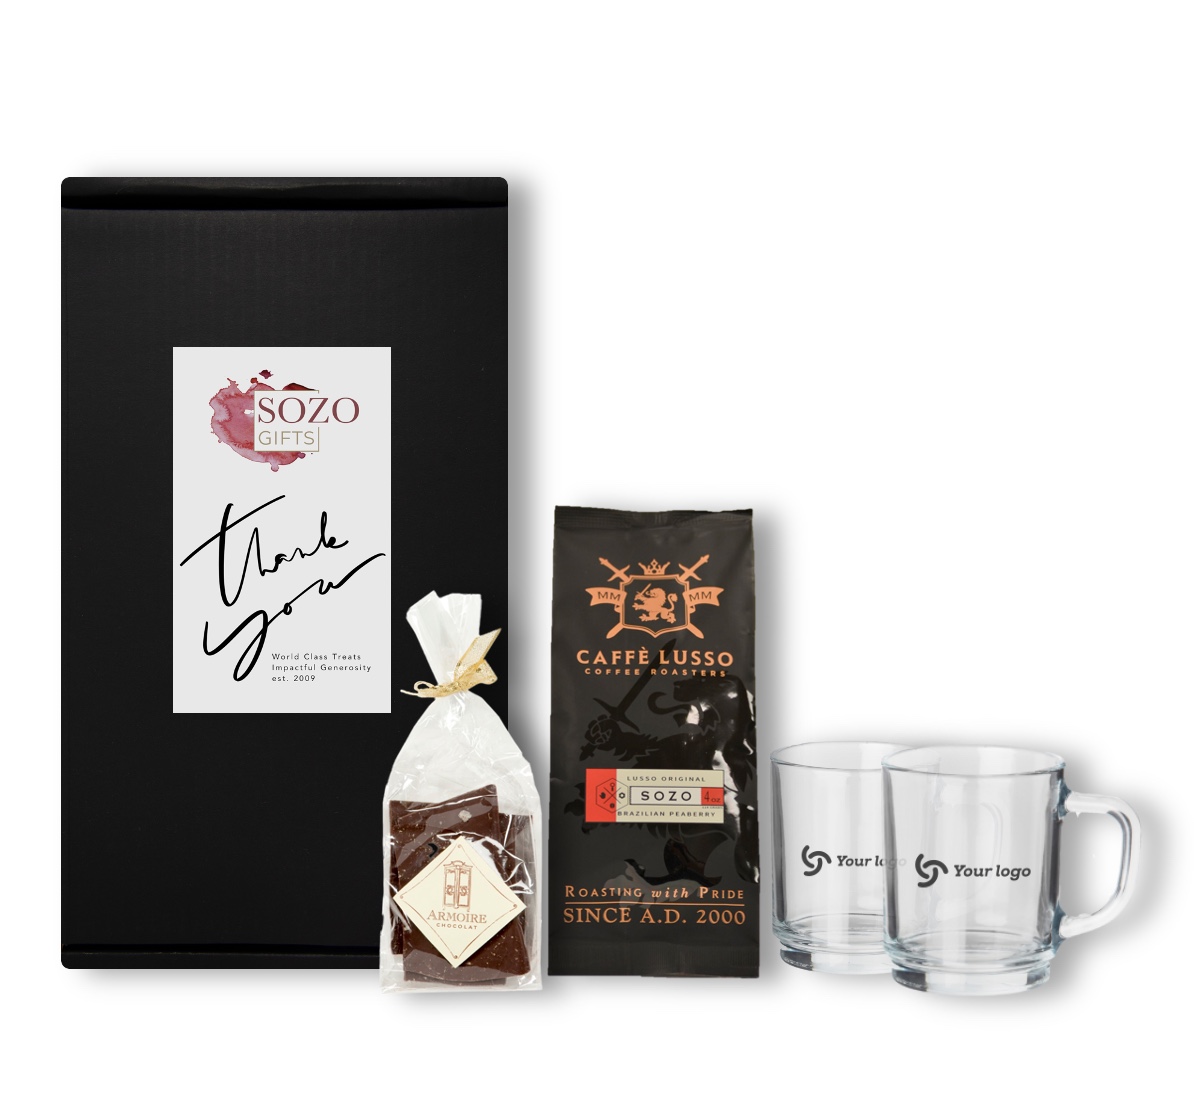 https://cdn11.bigcommerce.com/s-kgihy4hax9/images/stencil/original/products/162/890/Sozo_Gifts_Small_Coffee_Chocolate_and_Etched_Mugs_Gift_Box__35006.1632513227.jpg